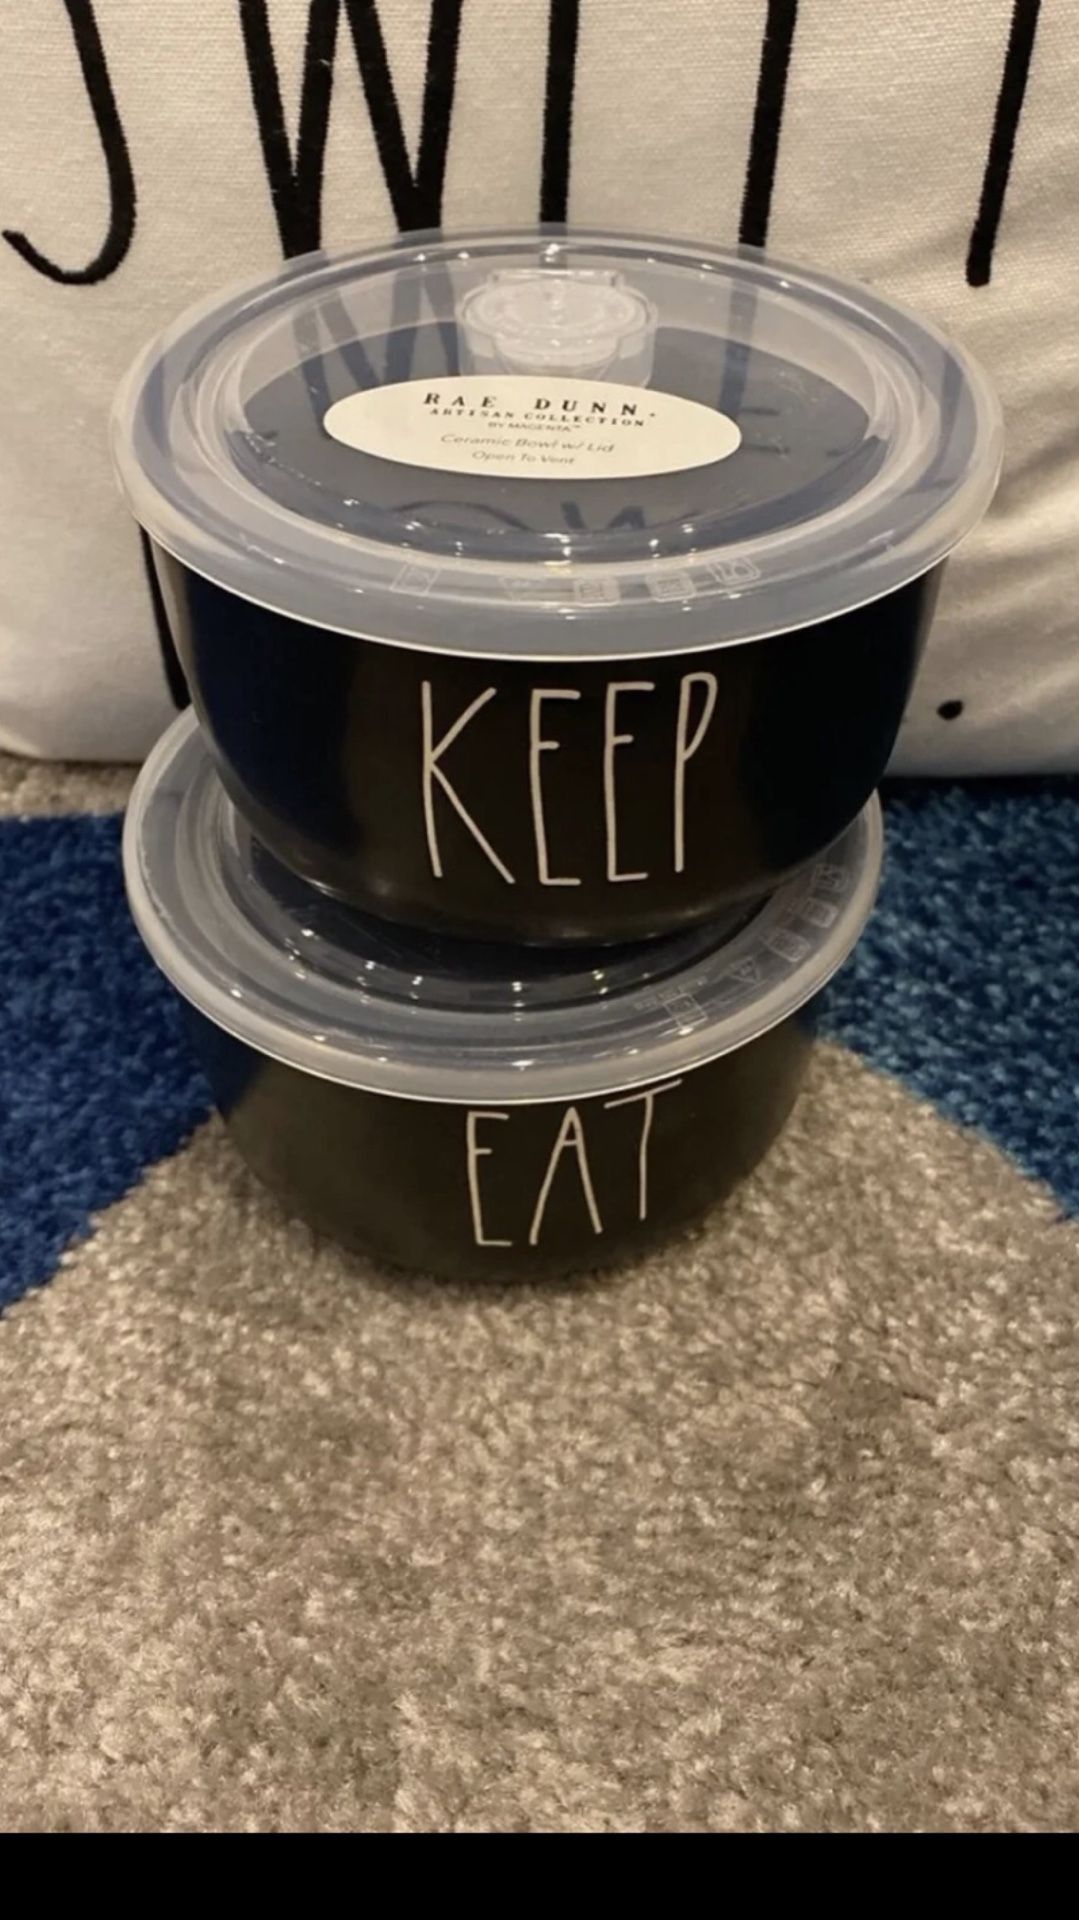 RAE DUNN KEEP AND EAT STORAGE CONTAINERS